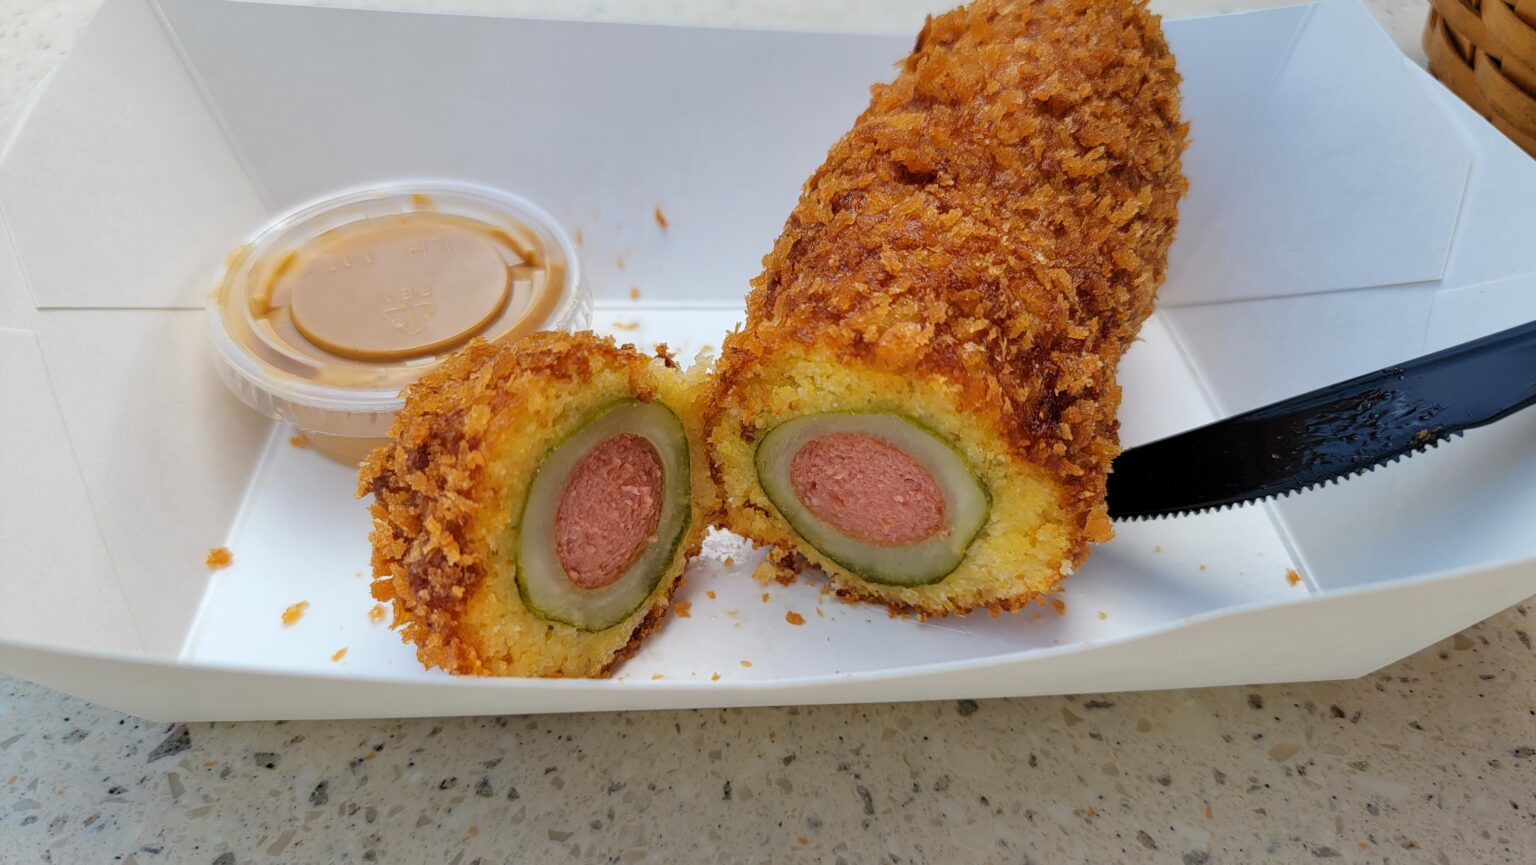 We finally tried the Pickle Corn Dog in Disneyland with Peanut Butter ...